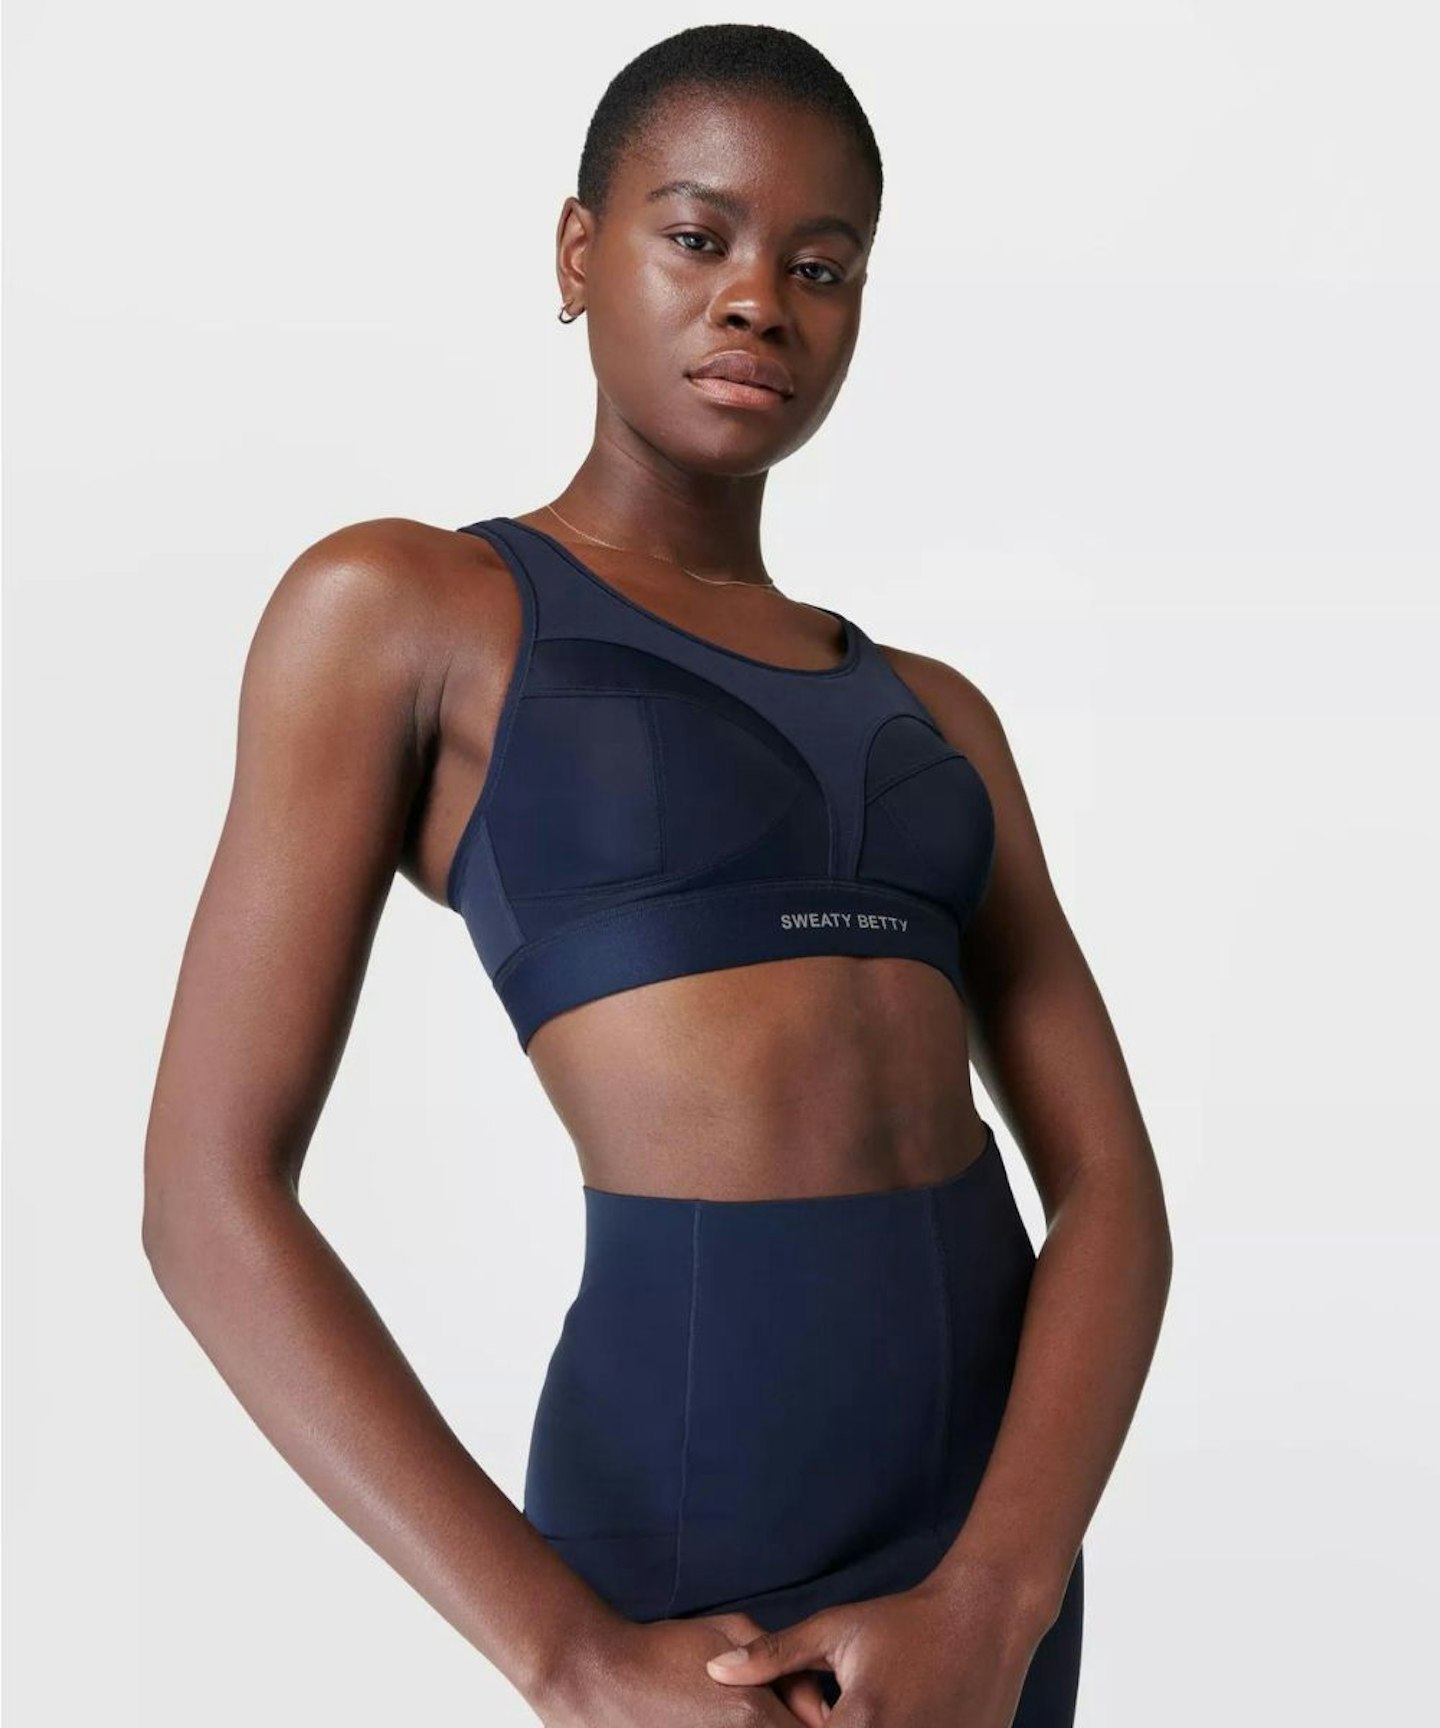 Sweaty Betty Hampstead - Look and feel powerful in the new limited